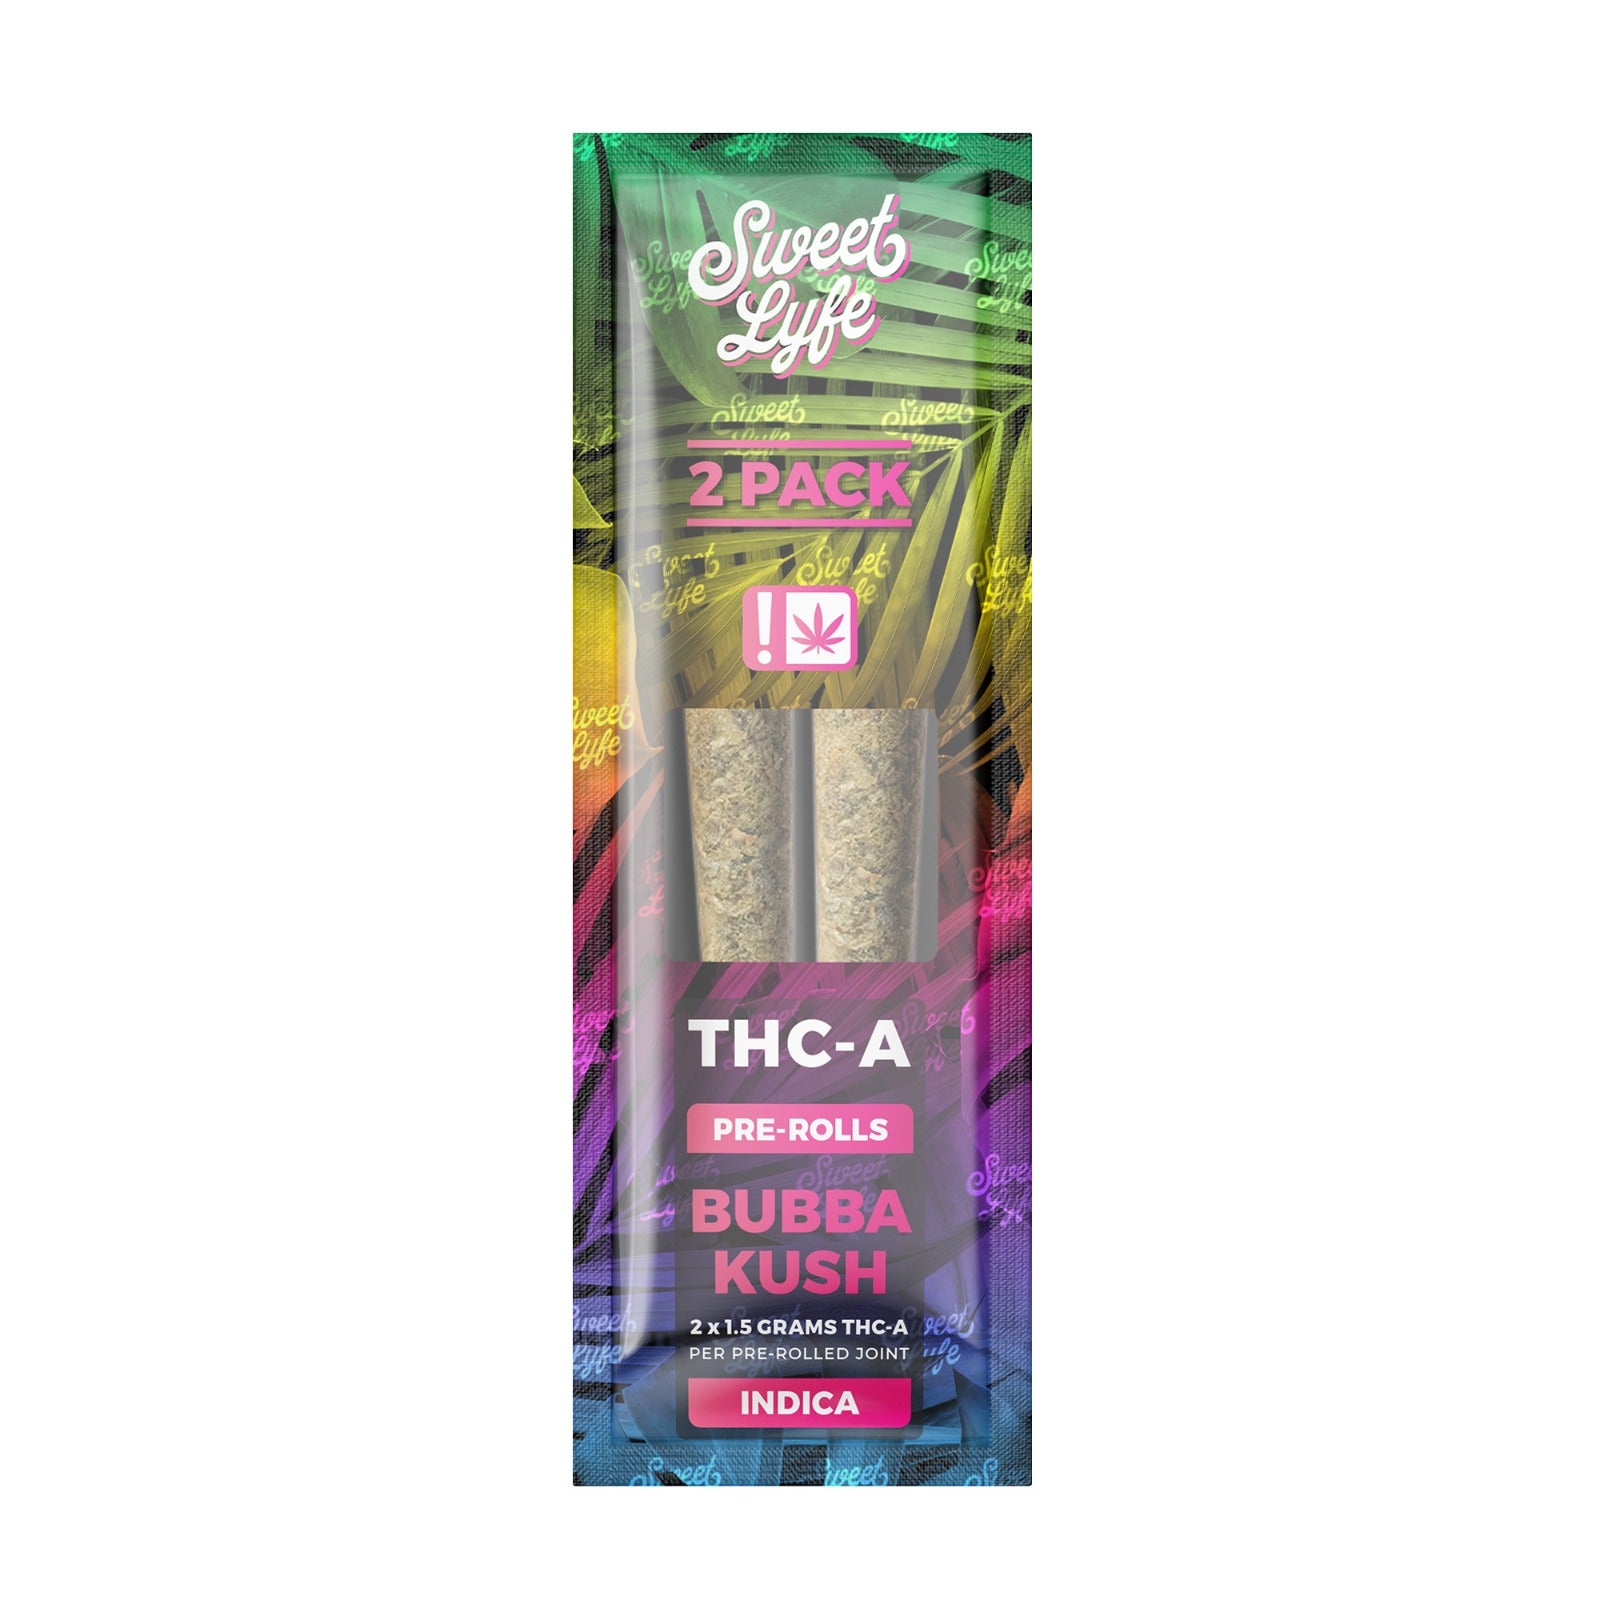 2 Pack Pre-Rolls Joint THC-A|Bubba Kush - Indica